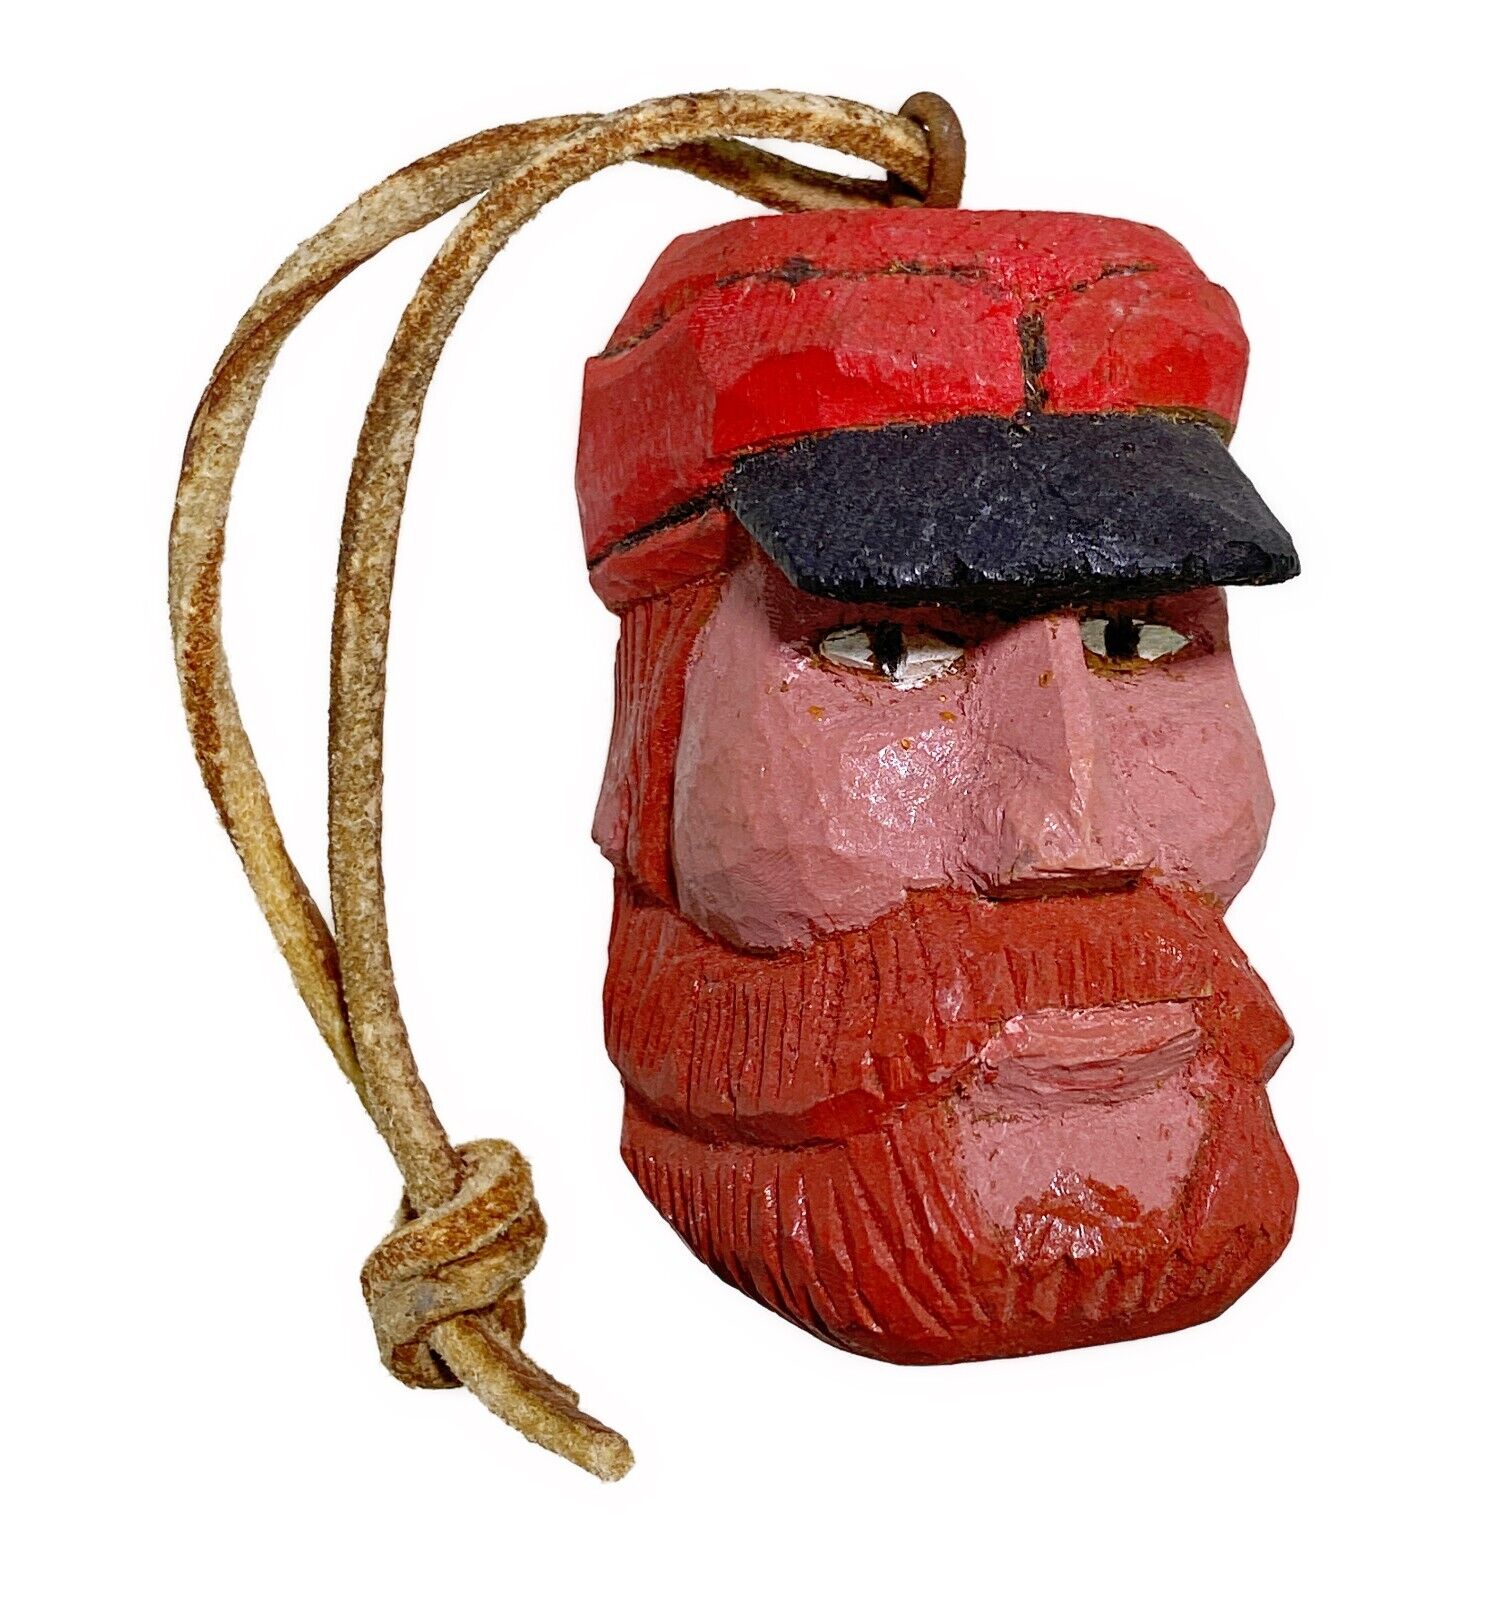 3” Carved Wood Sea Captain Christmas Tree Ornament Red Beard